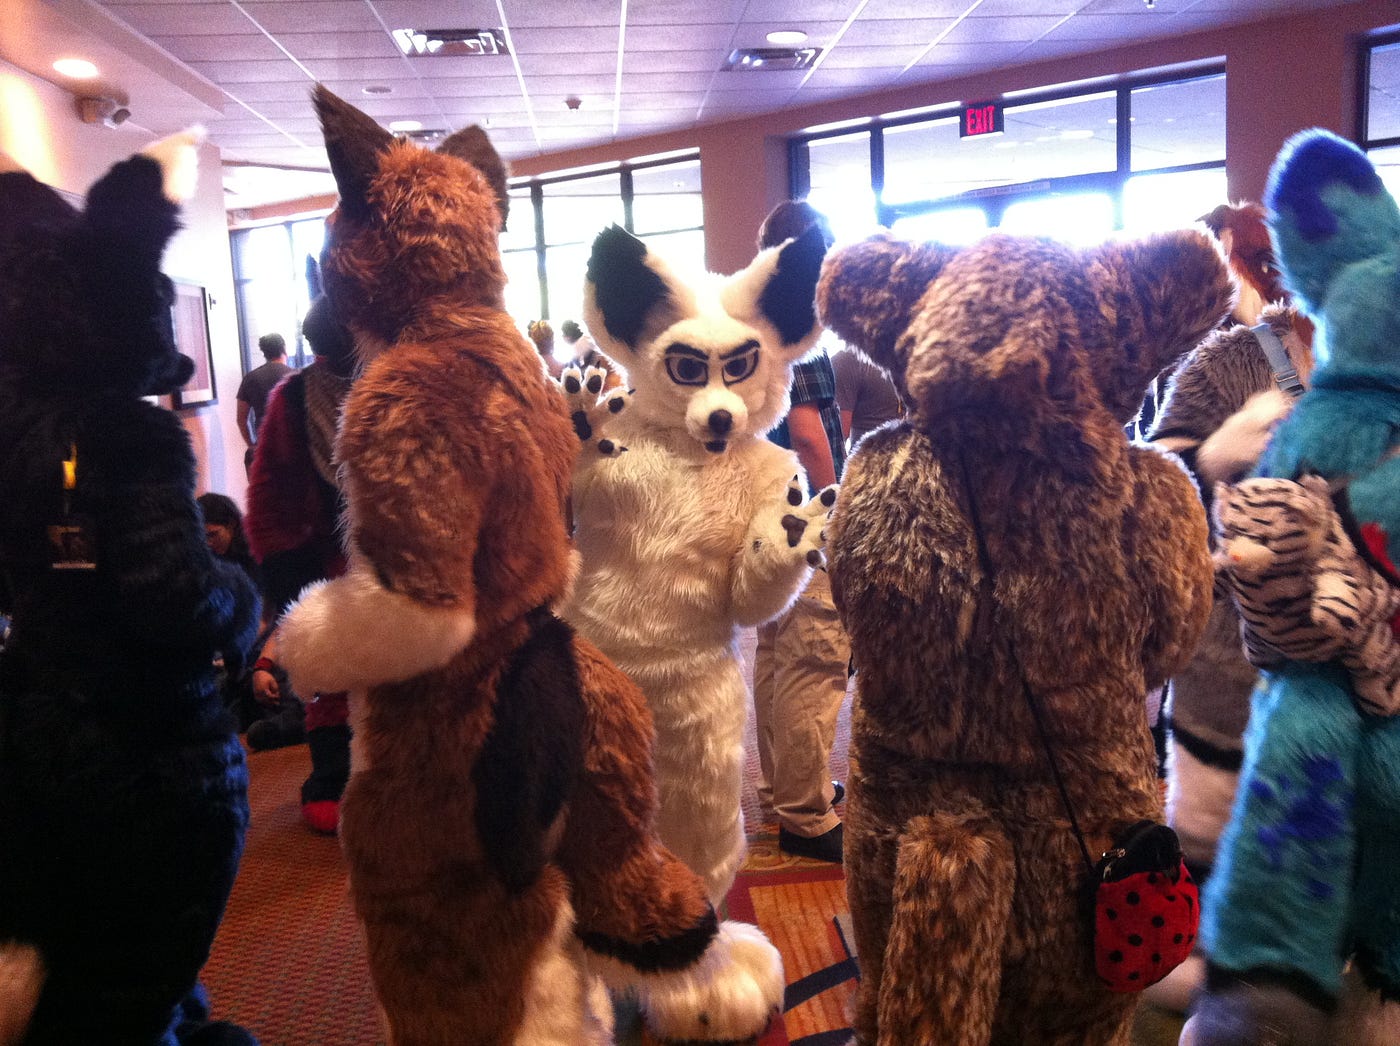 Fursuit mating: Where fantasy meets reality